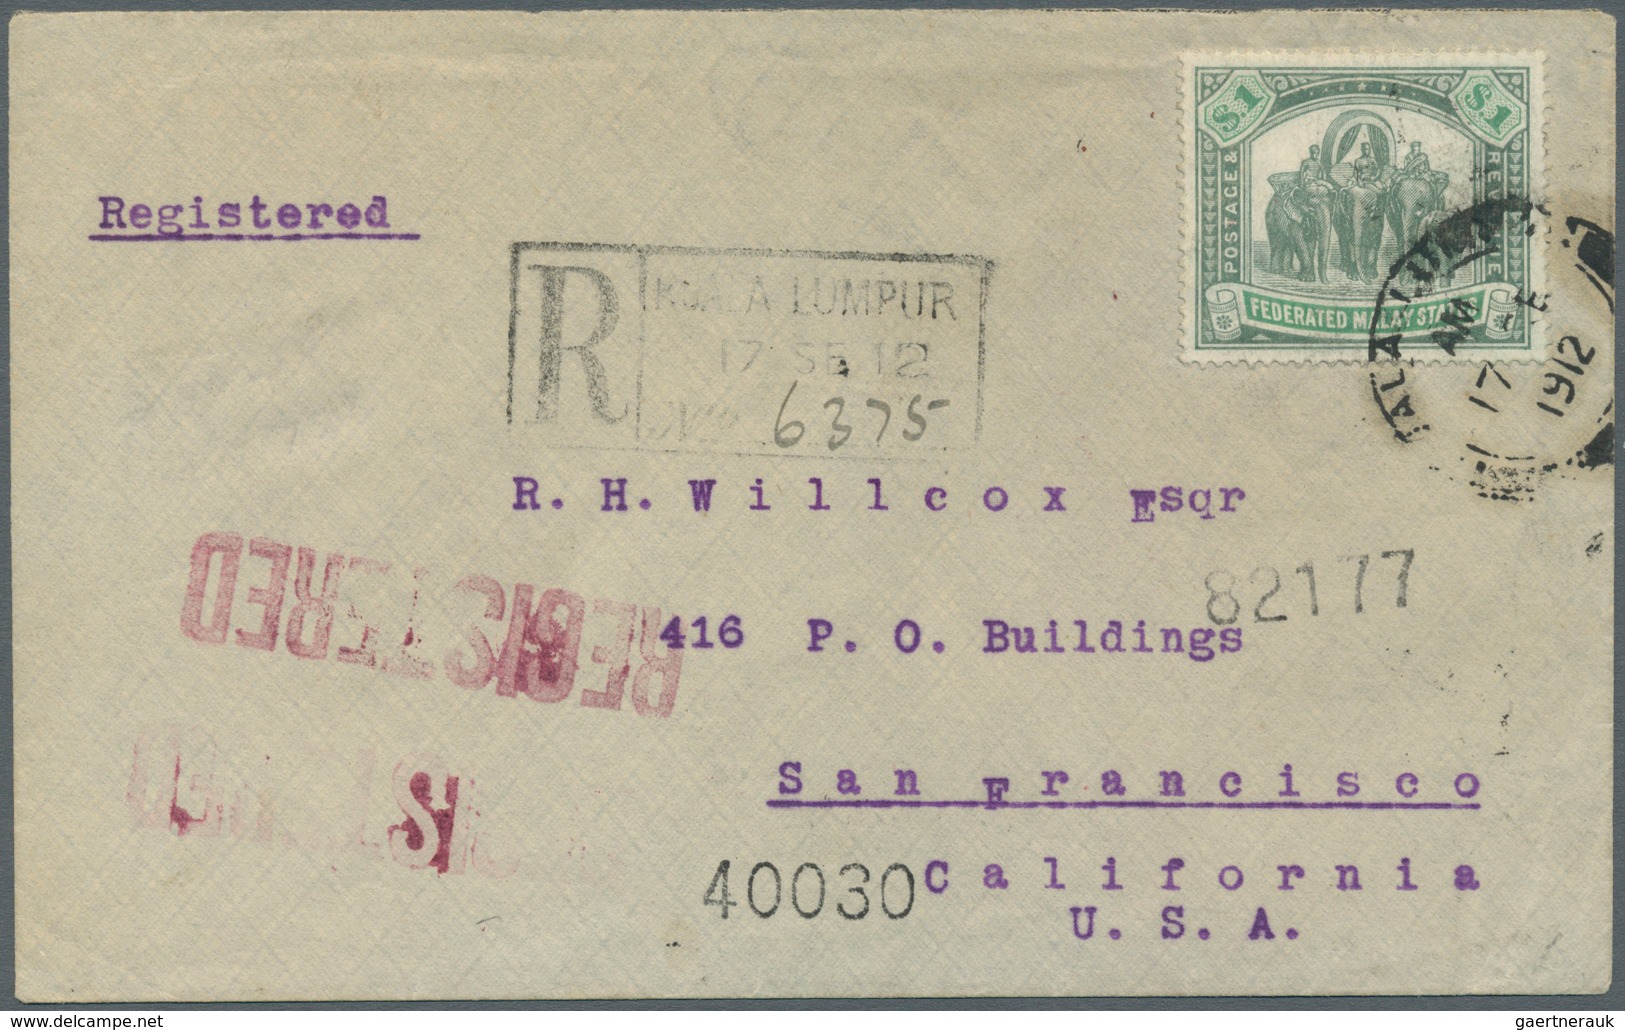 07075 Malaiische Staaten - Selangor: 1912 Registered Cover From Kuala Lumpur To San Francisco, USA Franked - Selangor